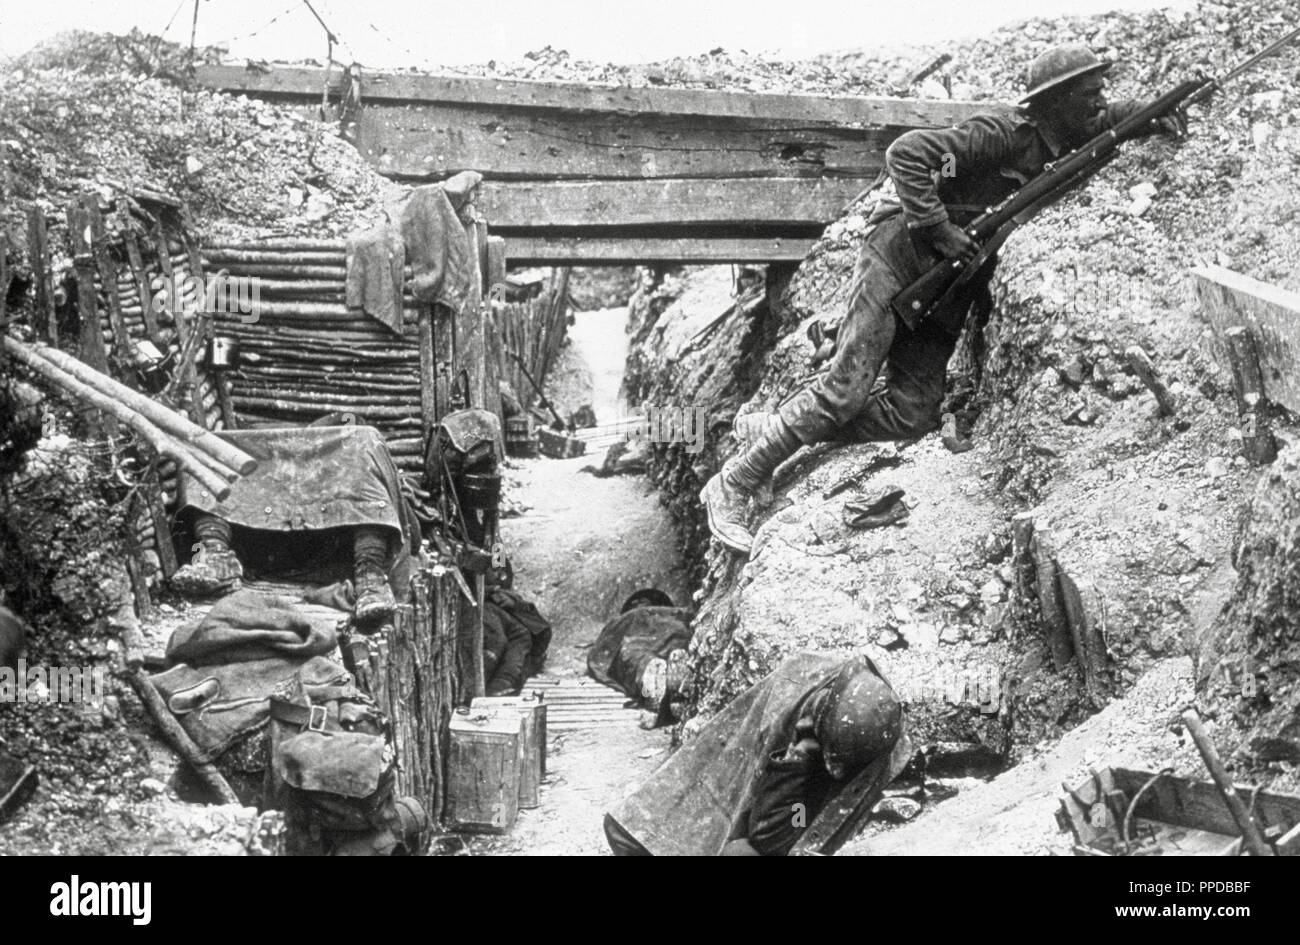 World War I (1914-1918). Battle of the Somme (1 July to 15 November 1916) fought between the German army and Franco-British troops. British trenches. Men of the 11th battalion. The Cheshire Regiment, near La Boisselle. Stock Photo